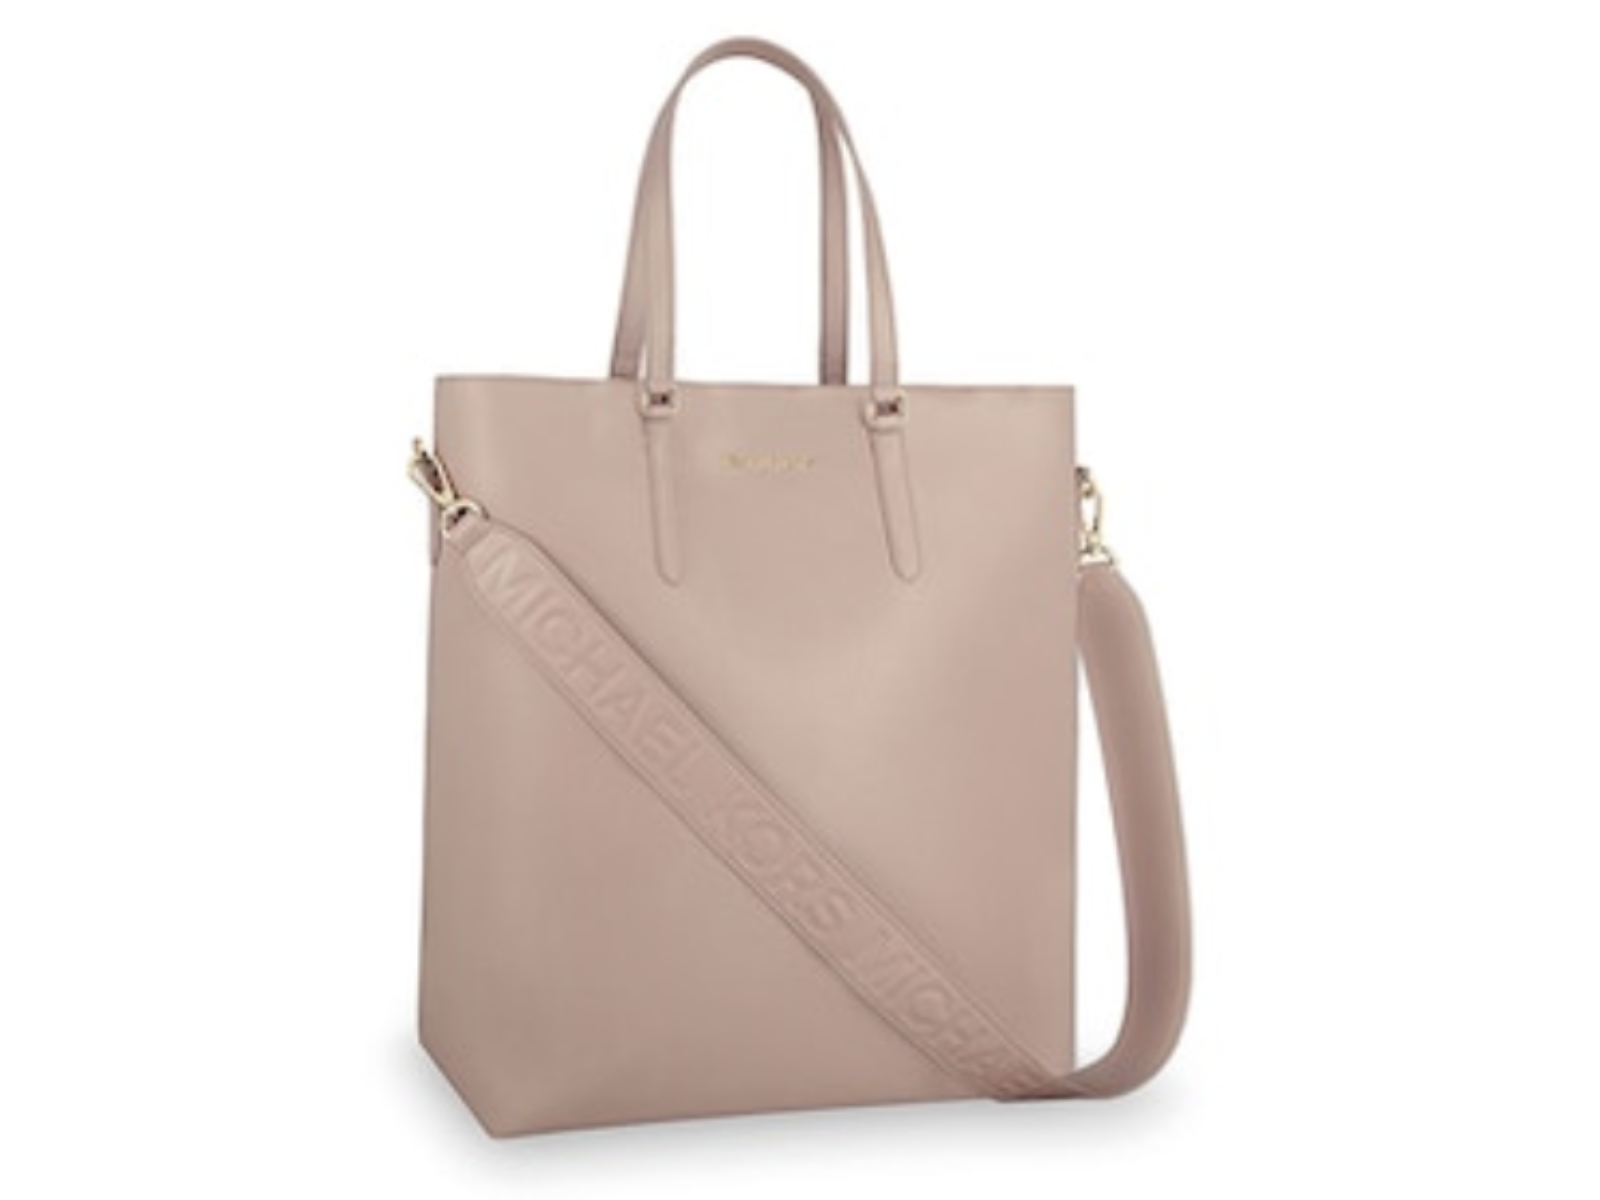 Michael Kors Crossbody Bag Multiple - $74 (62% Off Retail) - From India